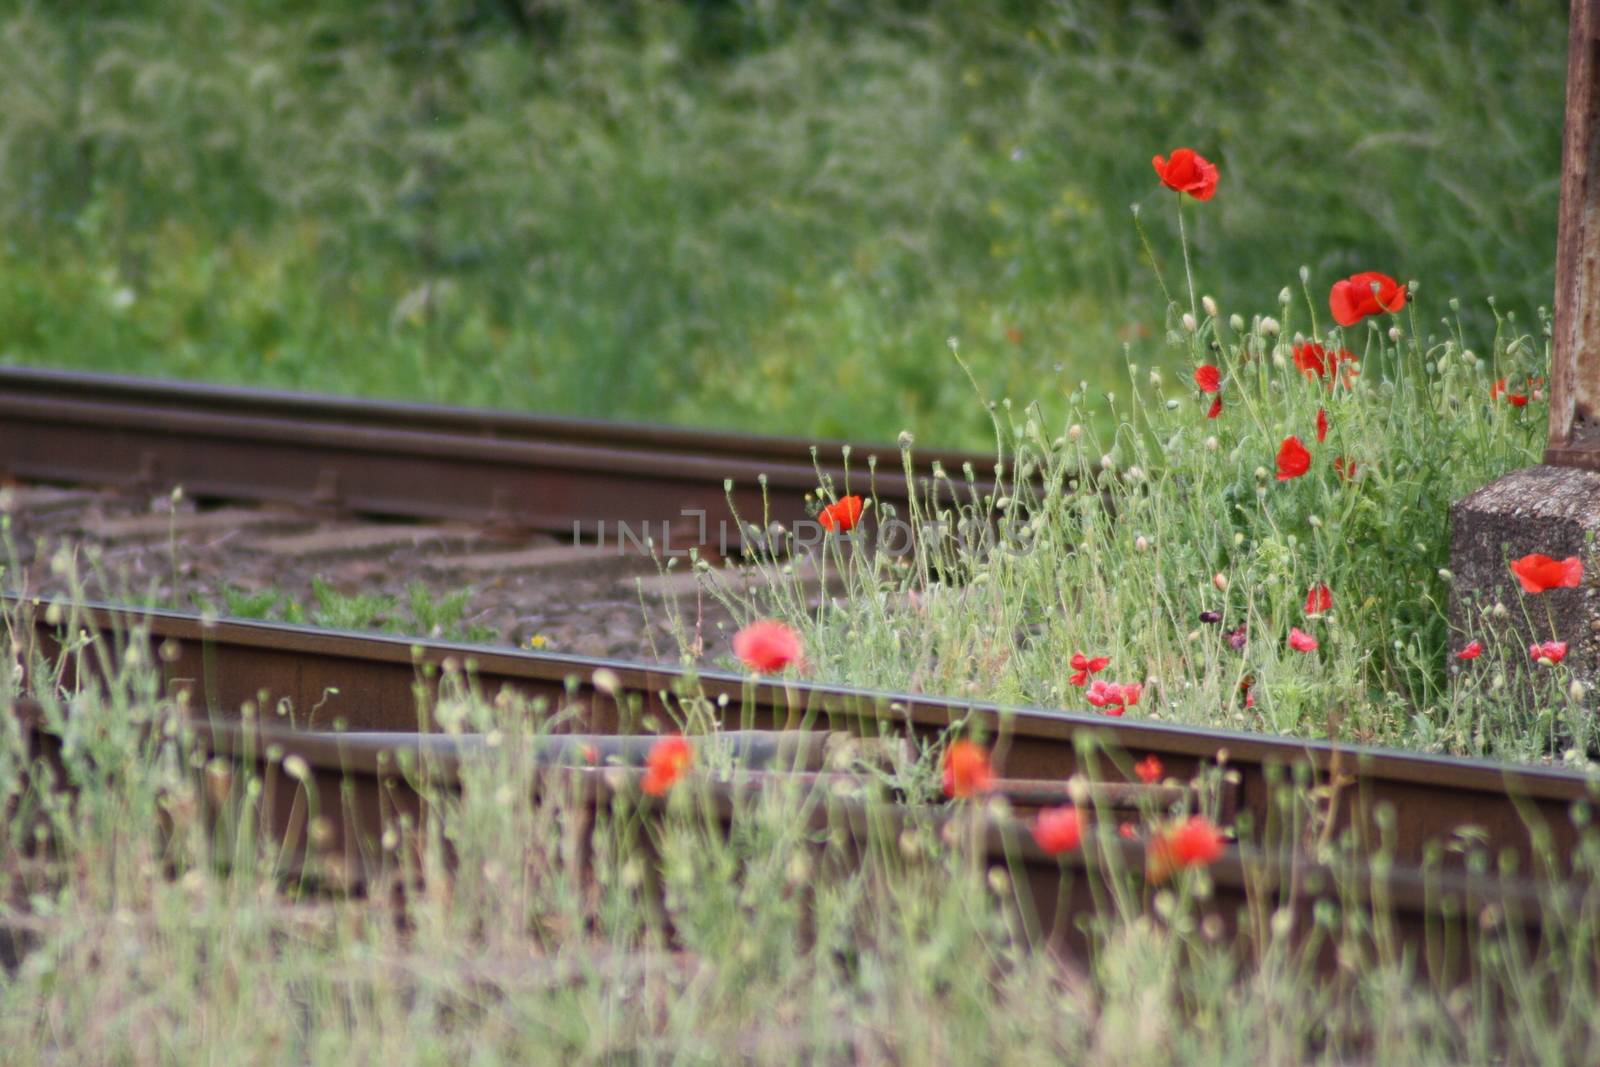 Red poppies at the train station  by balage941